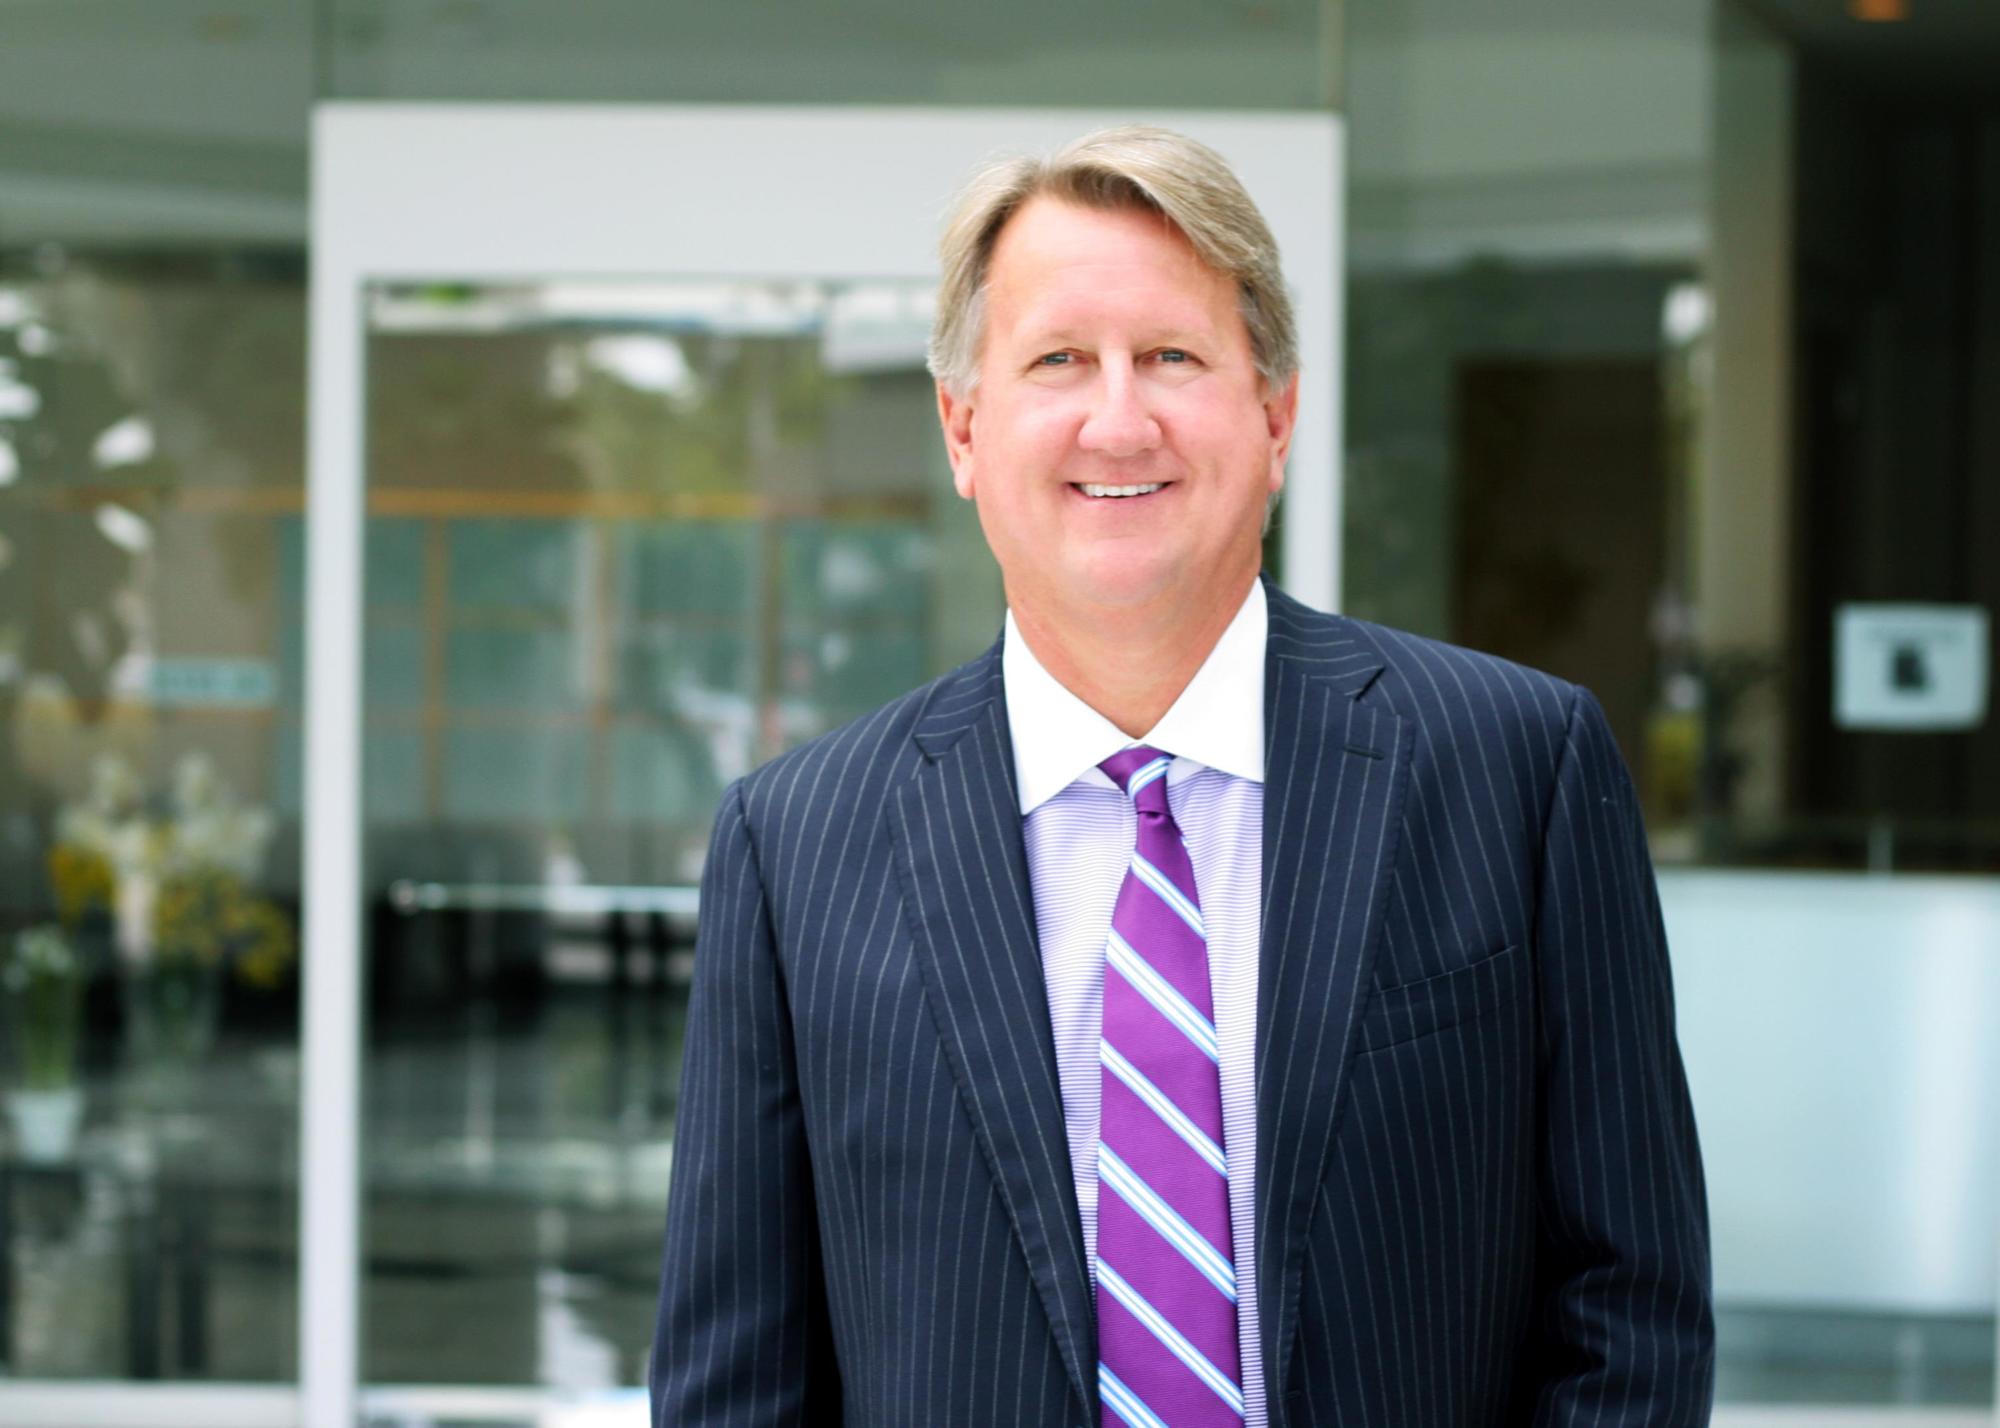 Michael Fay will lead Avison Young's efforts to sell various Sears assets in Tampa, Port Richey and beyond